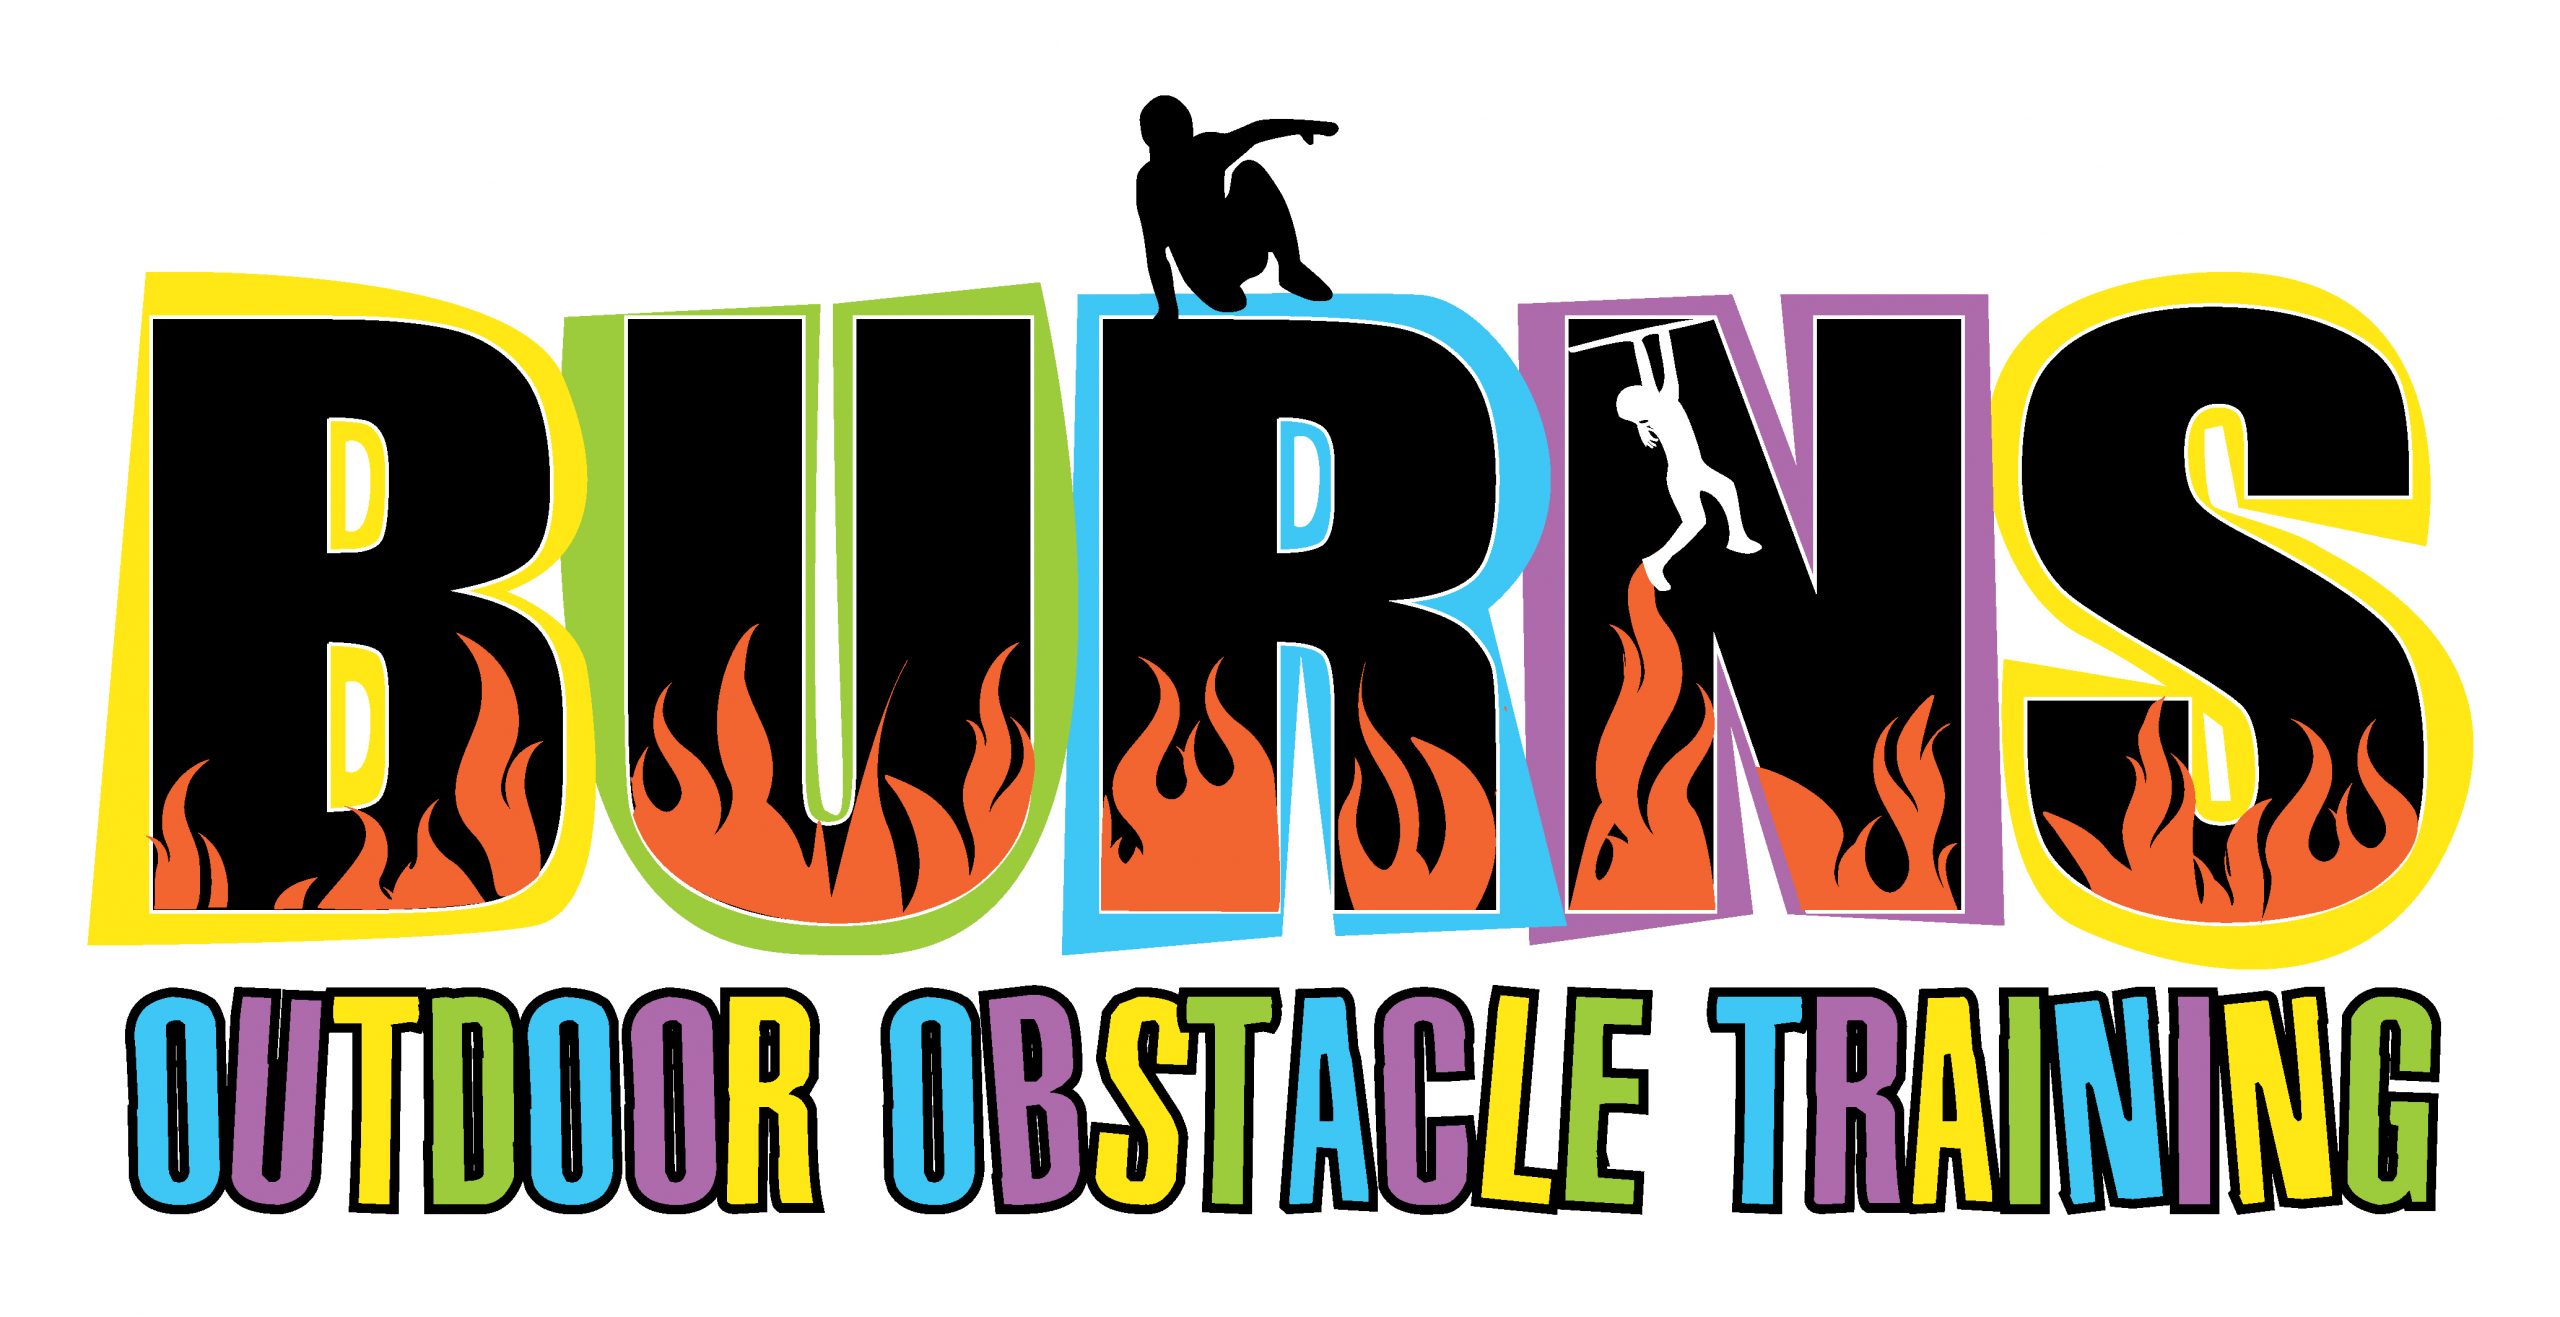 Burns Obstacle Training